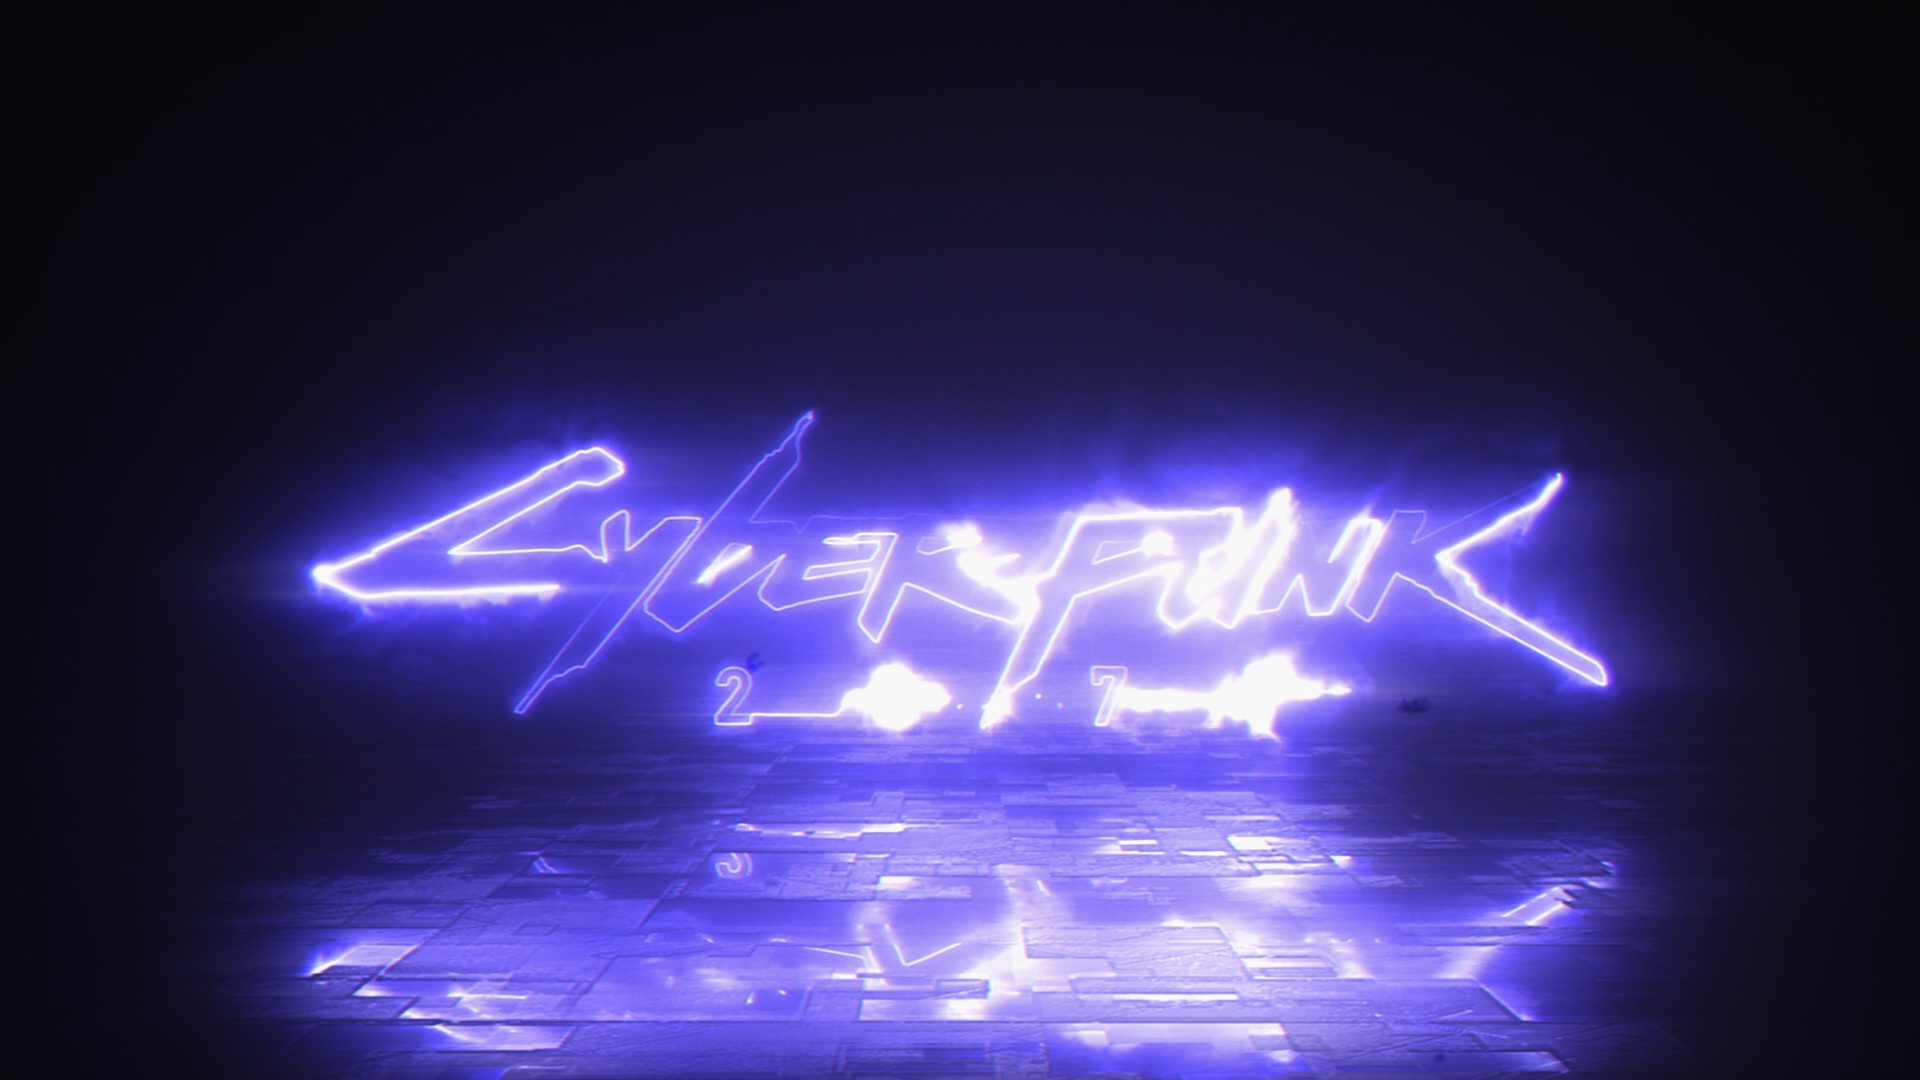 After Effects Neon Logo Intro Template #27 FREE DOWNLOAD – RKMFX